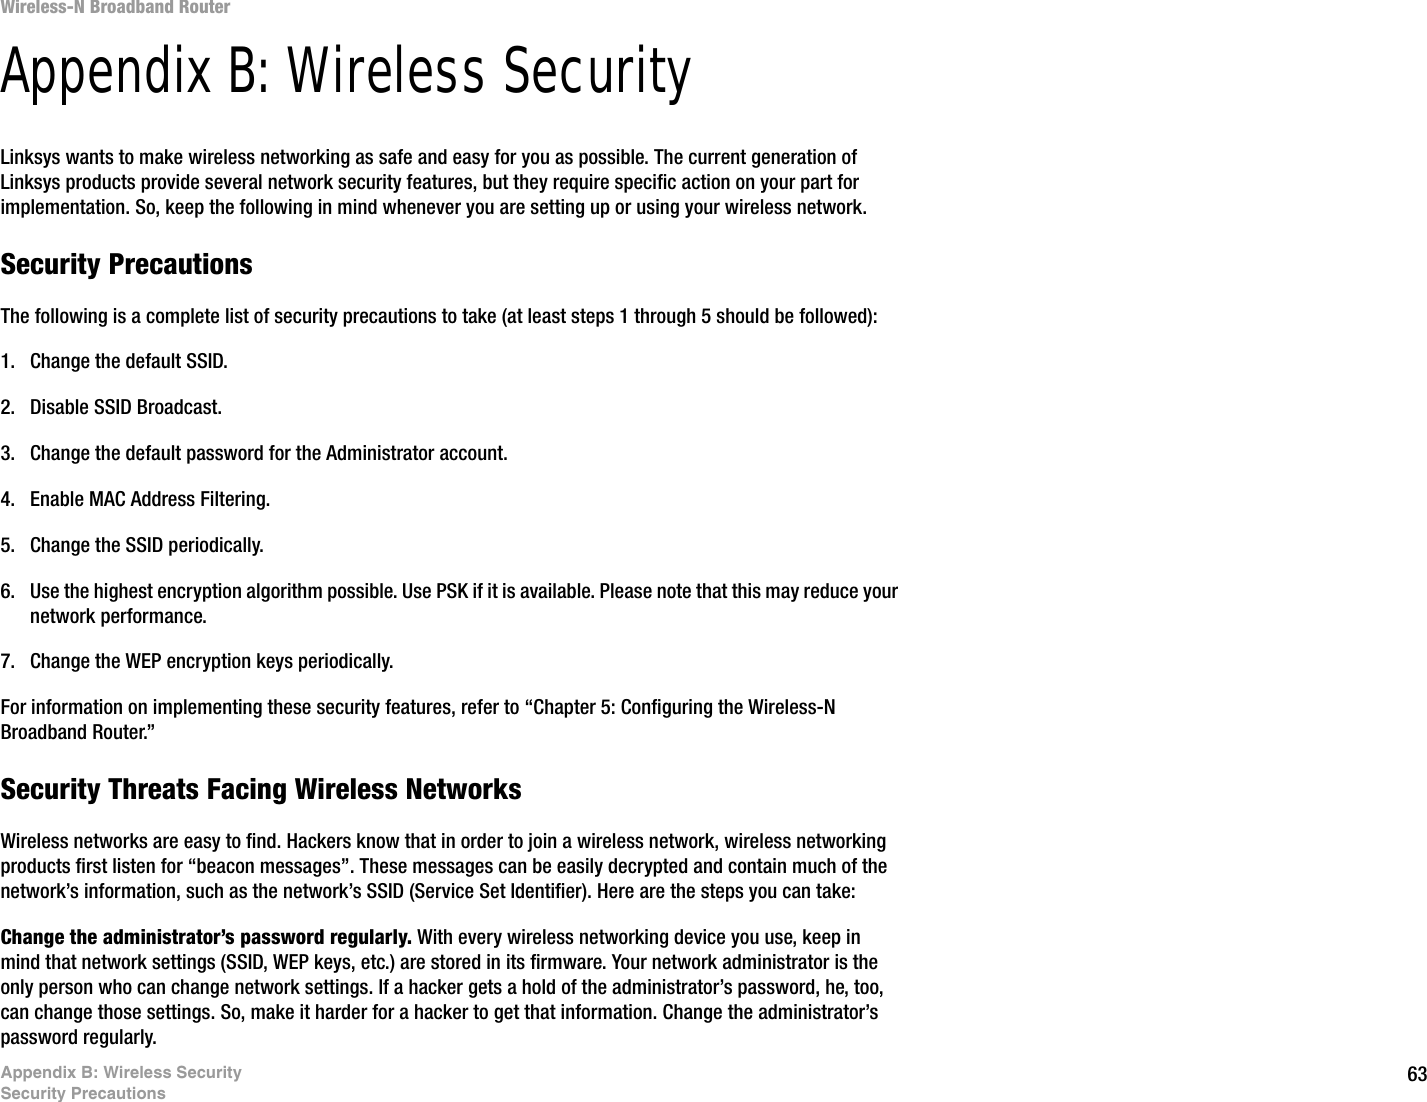 63Appendix B: Wireless SecuritySecurity PrecautionsWireless-N Broadband RouterAppendix B: Wireless SecurityLinksys wants to make wireless networking as safe and easy for you as possible. The current generation of Linksys products provide several network security features, but they require specific action on your part for implementation. So, keep the following in mind whenever you are setting up or using your wireless network.Security PrecautionsThe following is a complete list of security precautions to take (at least steps 1 through 5 should be followed):1. Change the default SSID. 2. Disable SSID Broadcast. 3. Change the default password for the Administrator account. 4. Enable MAC Address Filtering. 5. Change the SSID periodically. 6. Use the highest encryption algorithm possible. Use PSK if it is available. Please note that this may reduce your network performance. 7. Change the WEP encryption keys periodically. For information on implementing these security features, refer to “Chapter 5: Configuring the Wireless-N Broadband Router.”Security Threats Facing Wireless Networks Wireless networks are easy to find. Hackers know that in order to join a wireless network, wireless networking products first listen for “beacon messages”. These messages can be easily decrypted and contain much of the network’s information, such as the network’s SSID (Service Set Identifier). Here are the steps you can take:Change the administrator’s password regularly. With every wireless networking device you use, keep in mind that network settings (SSID, WEP keys, etc.) are stored in its firmware. Your network administrator is the only person who can change network settings. If a hacker gets a hold of the administrator’s password, he, too, can change those settings. So, make it harder for a hacker to get that information. Change the administrator’s password regularly.